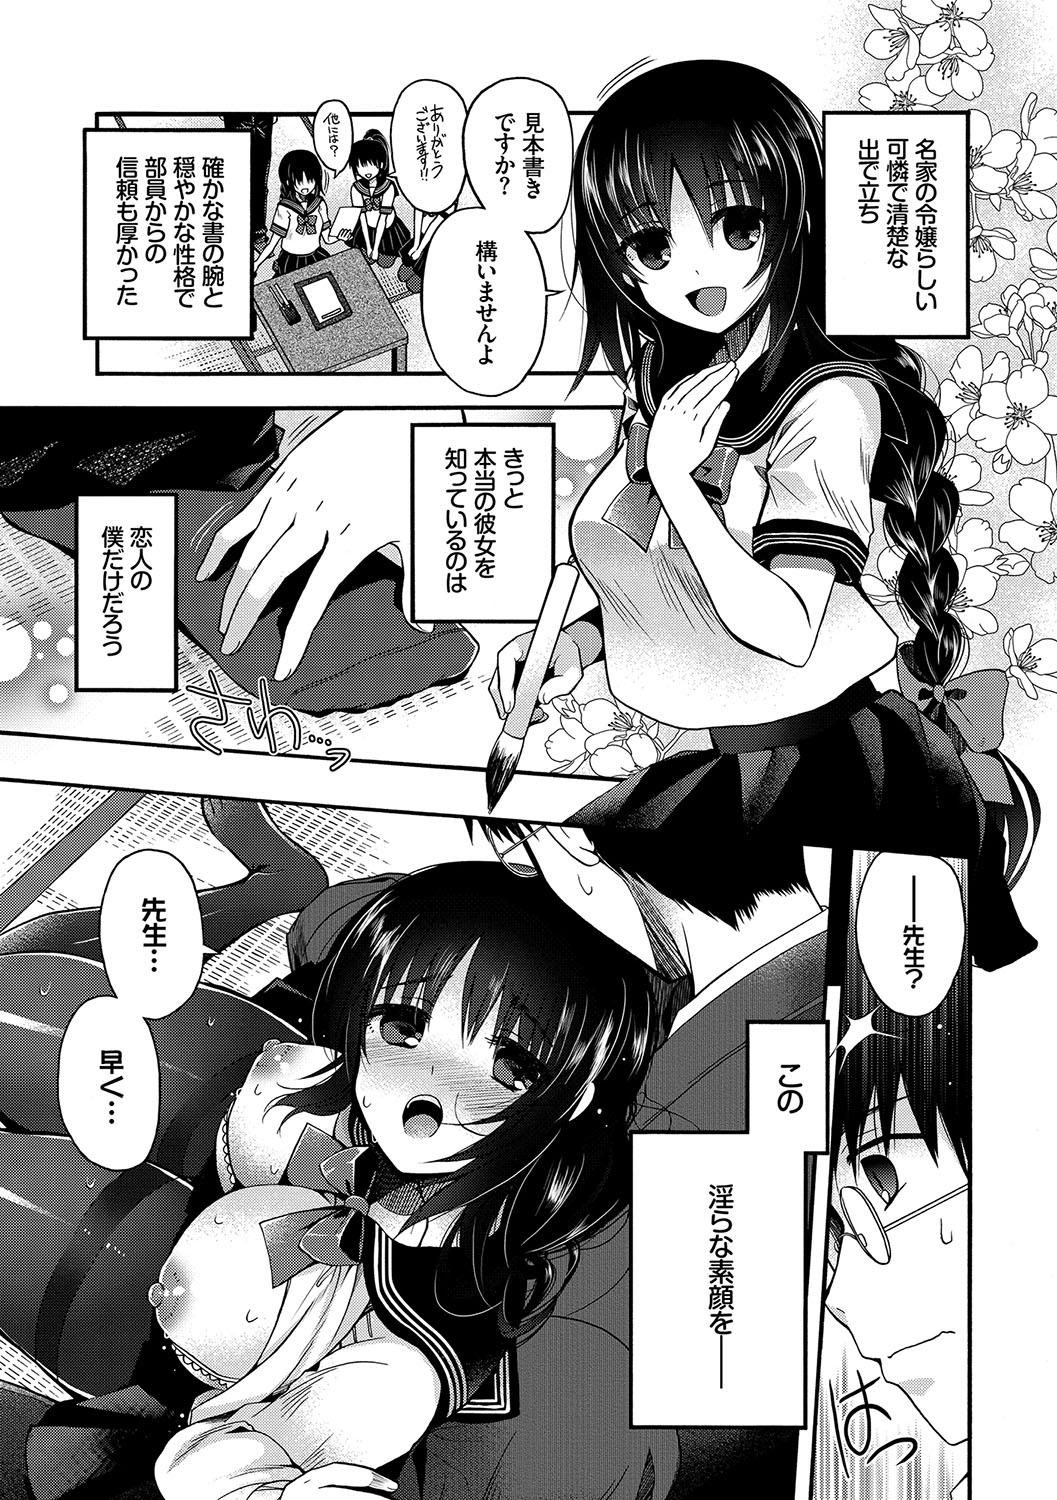 Hatsukoi Melty - Melty First Love 117